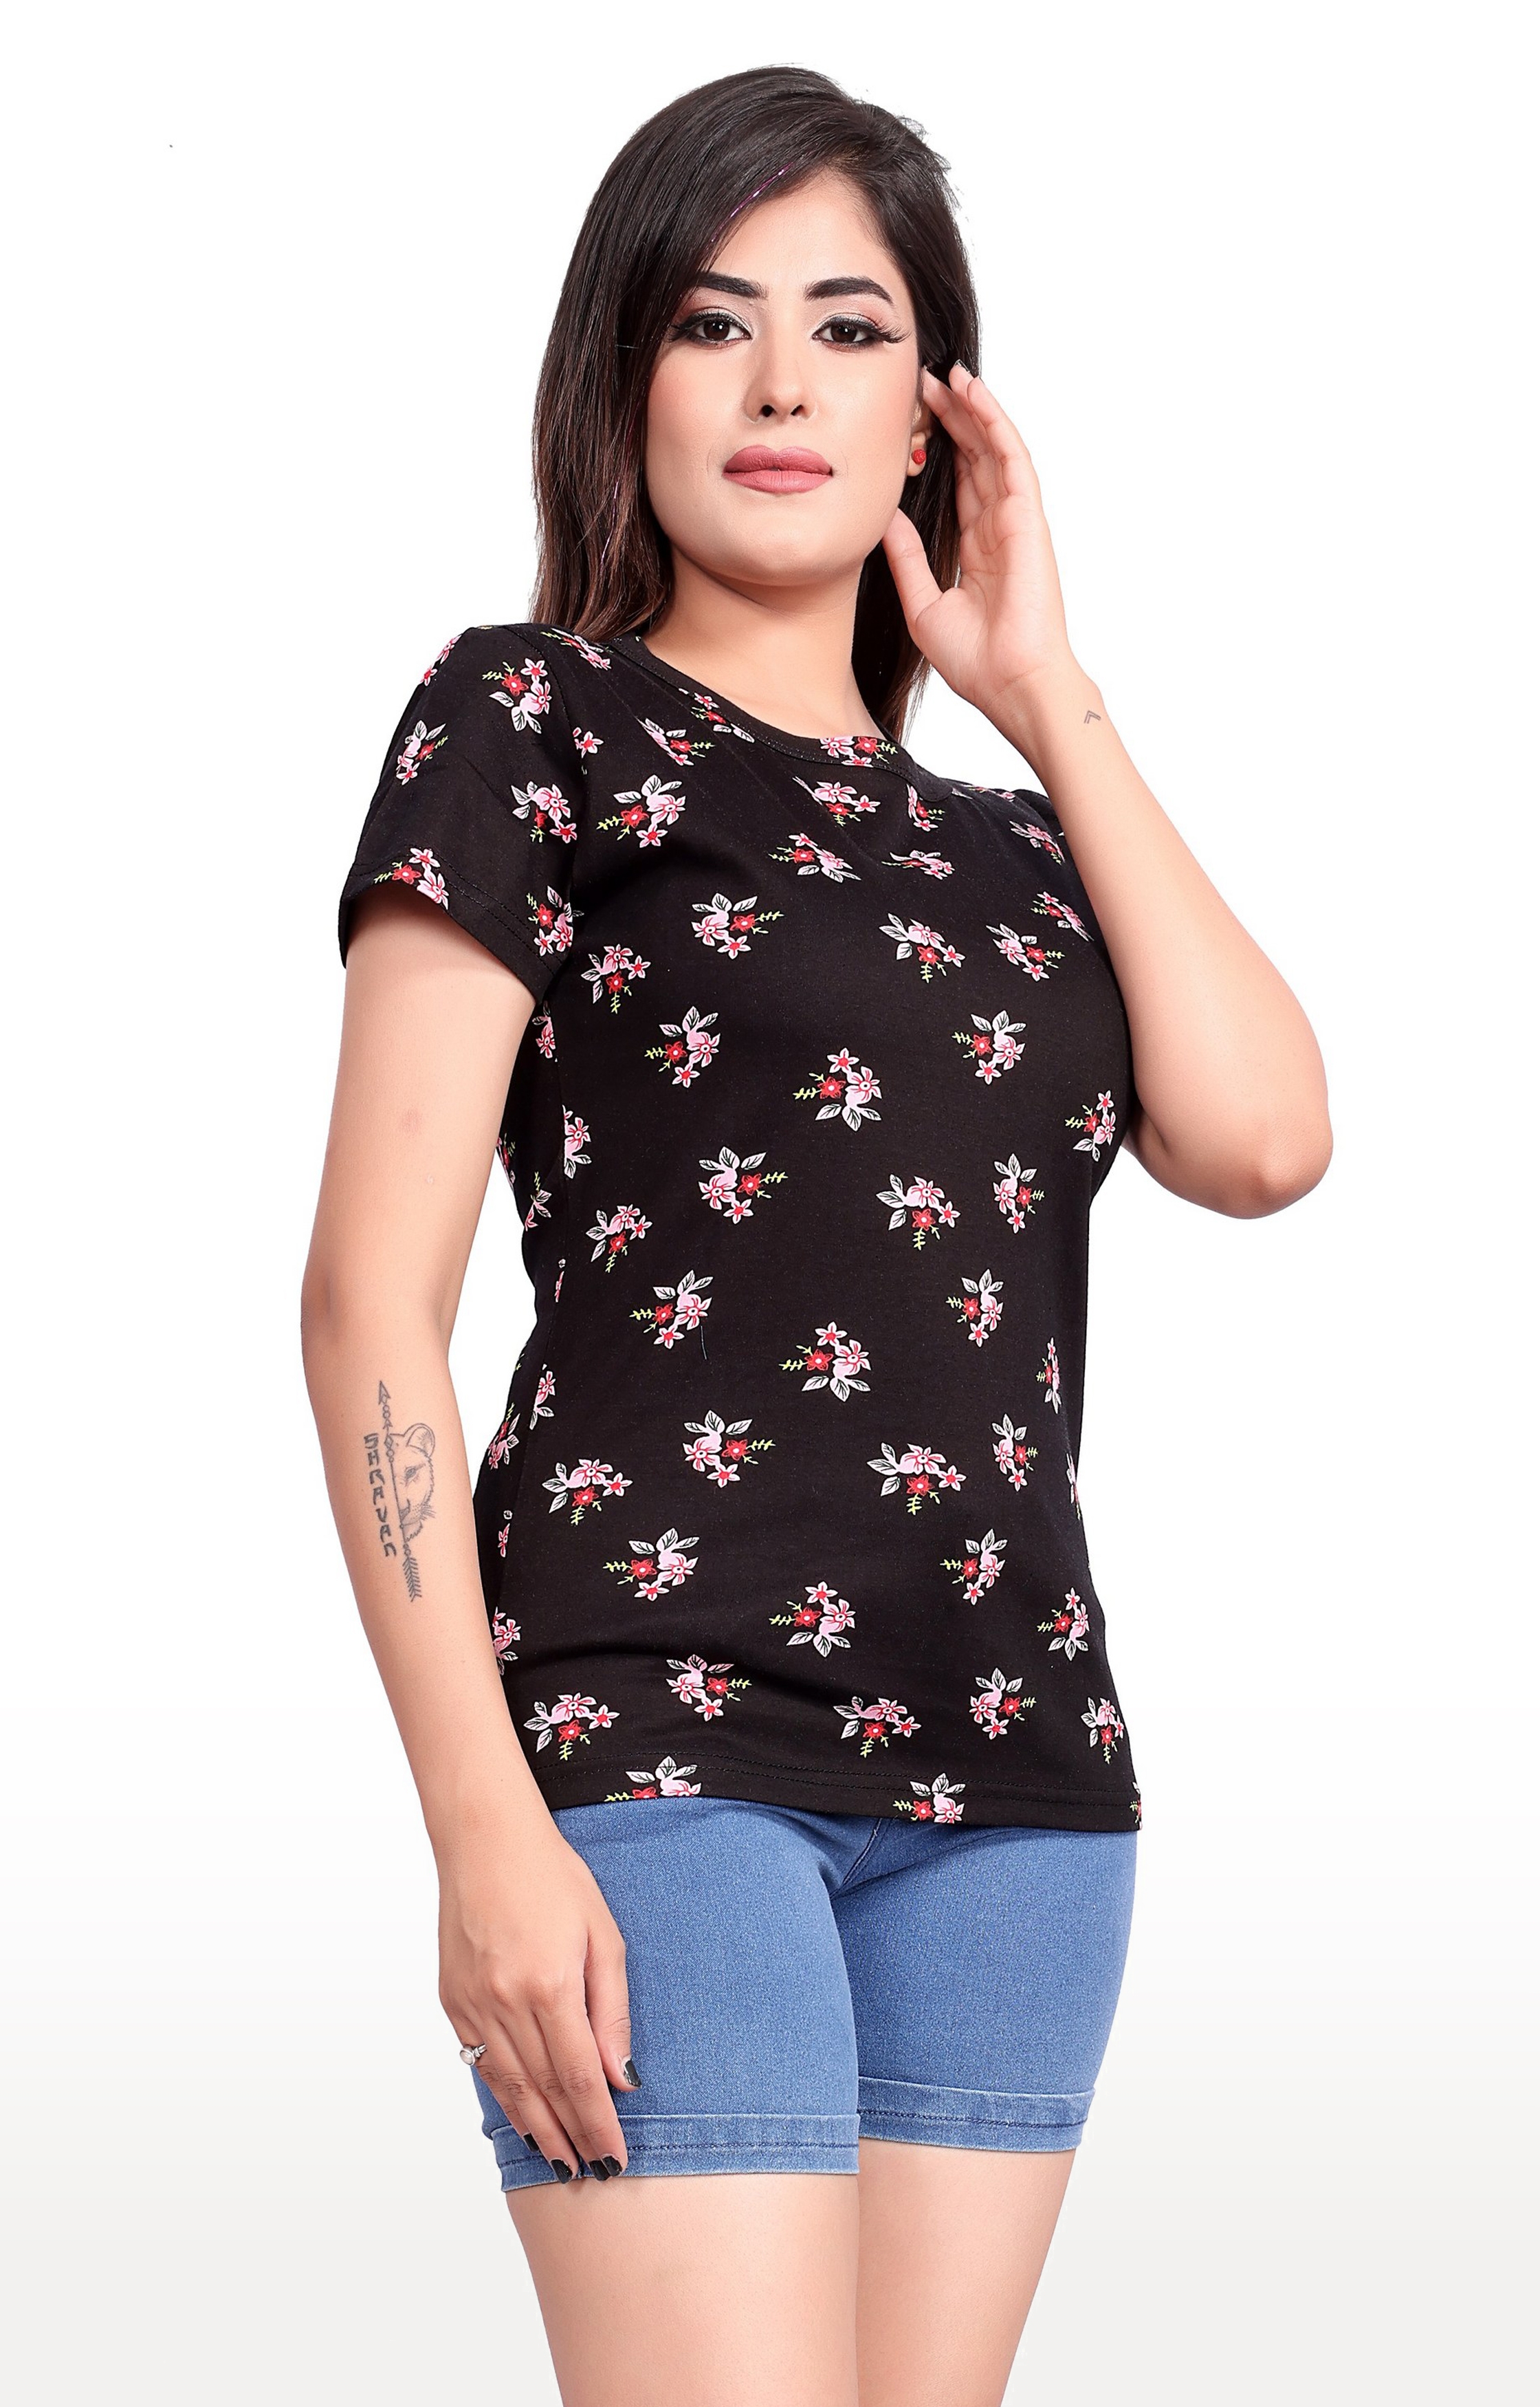 Impex | Impex Women's Black Cotton Hosiery Printed Floral Round Neck T-shirt 1